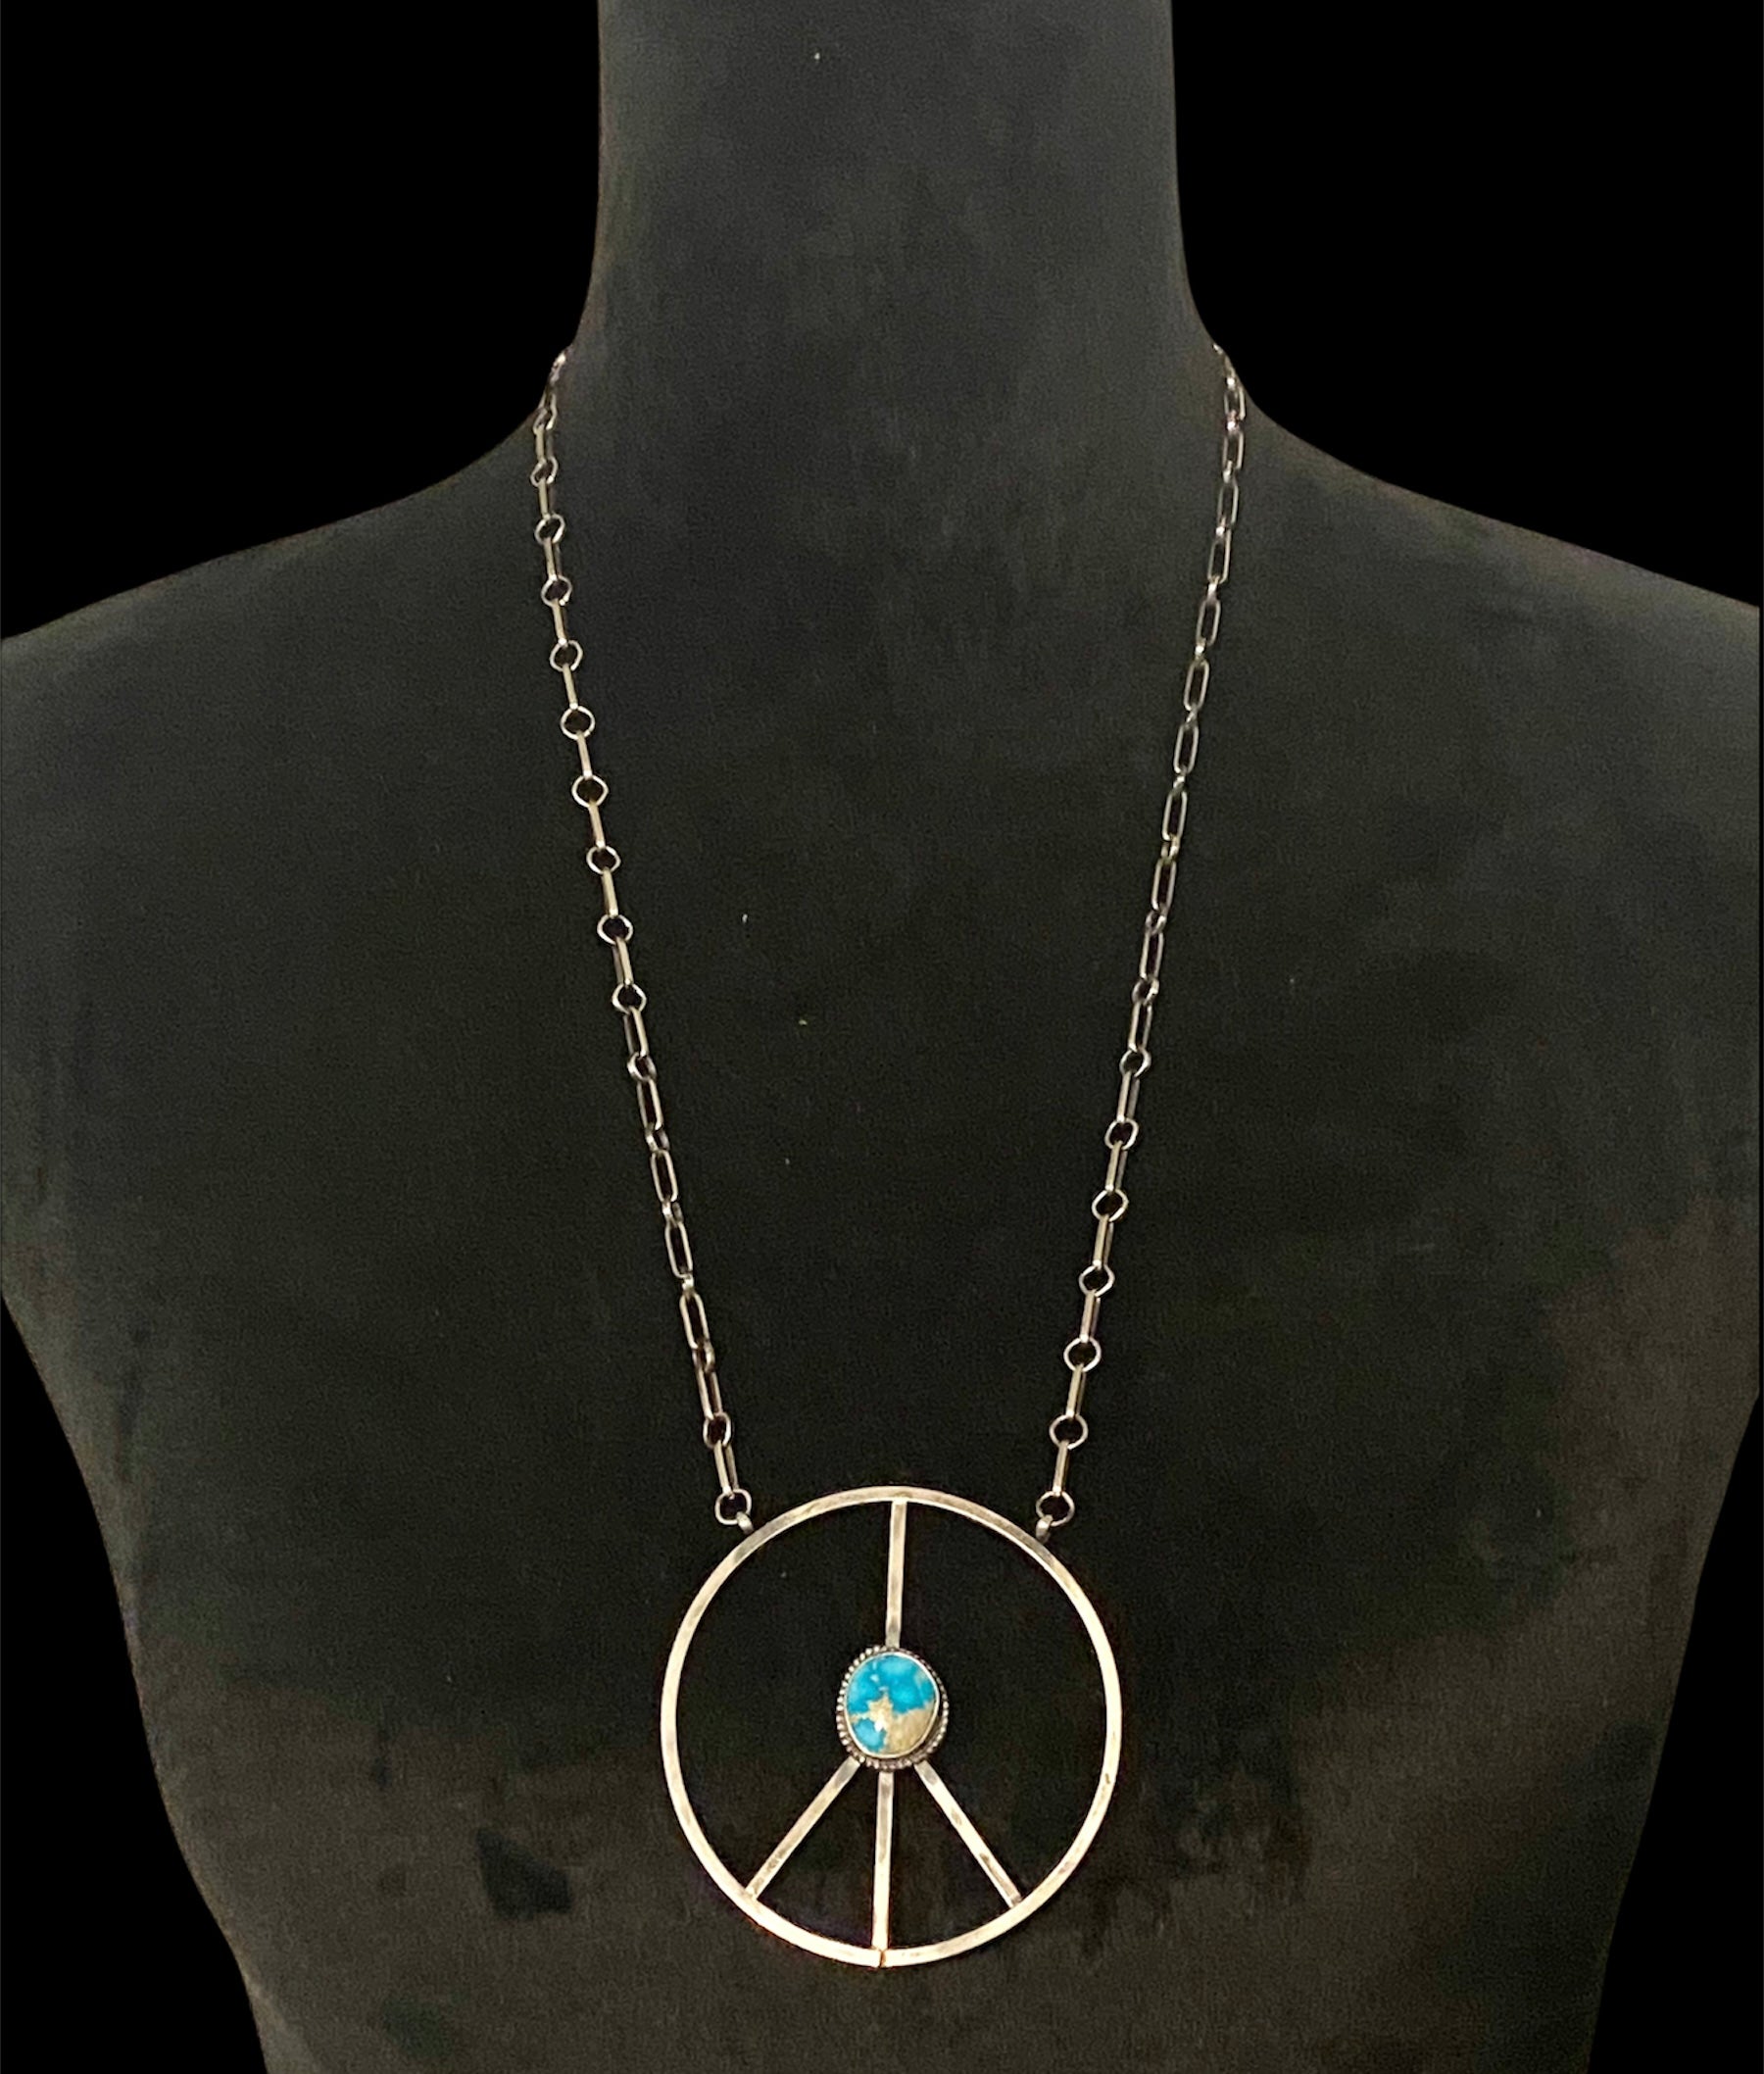 Linda Lincoln Sonoran Rose Turquoise & Sterling Silver Peace Sign Necklace